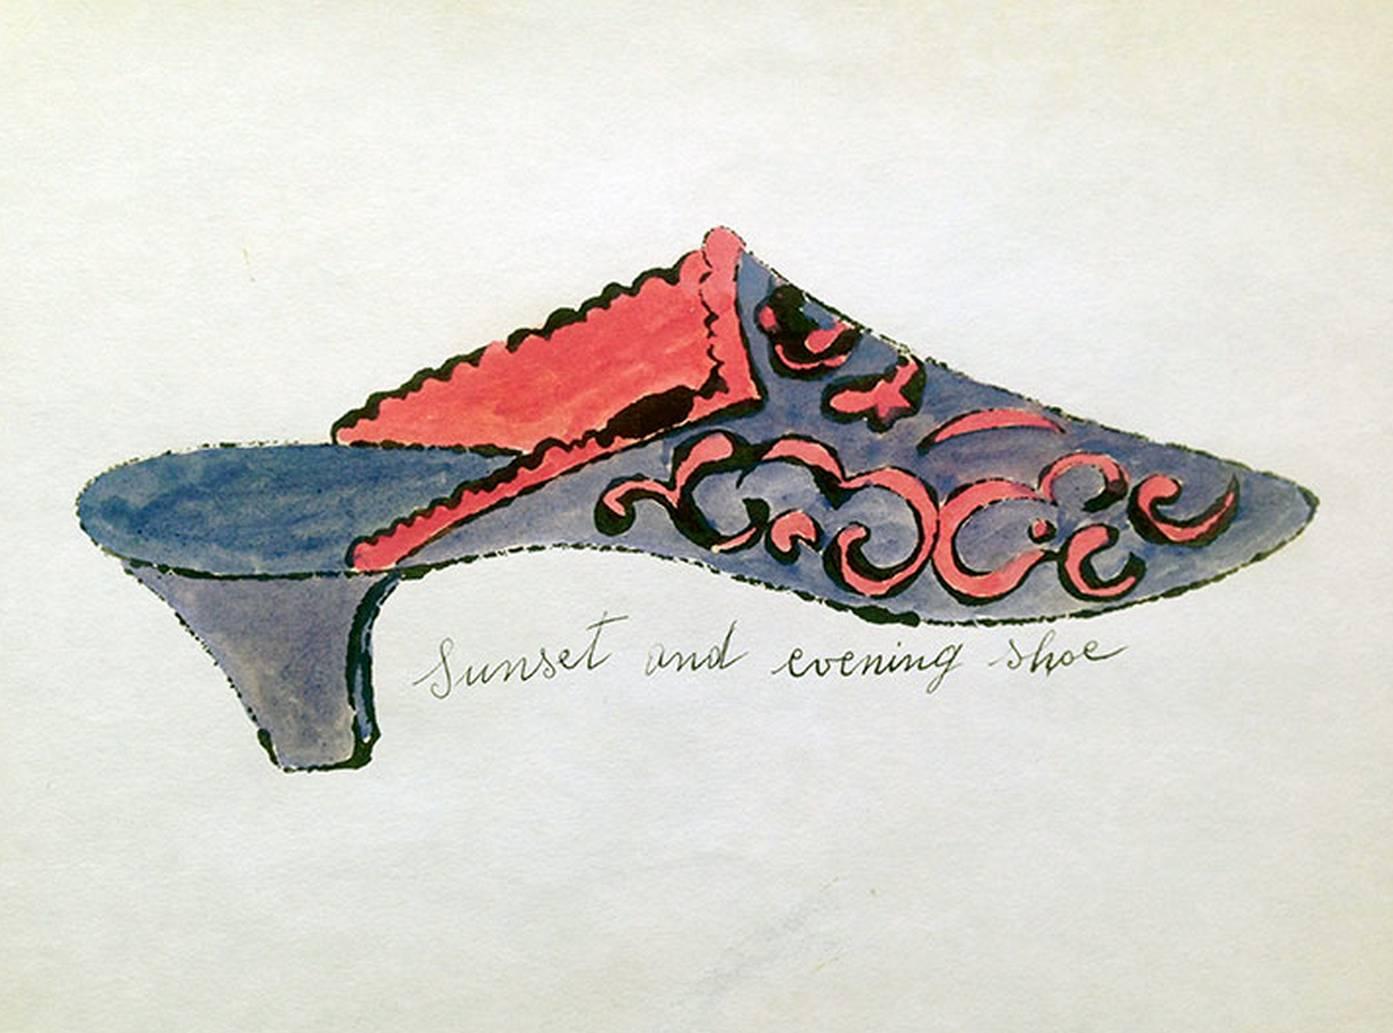 Andy Warhol Still-Life - Sunset and Evening Shoe